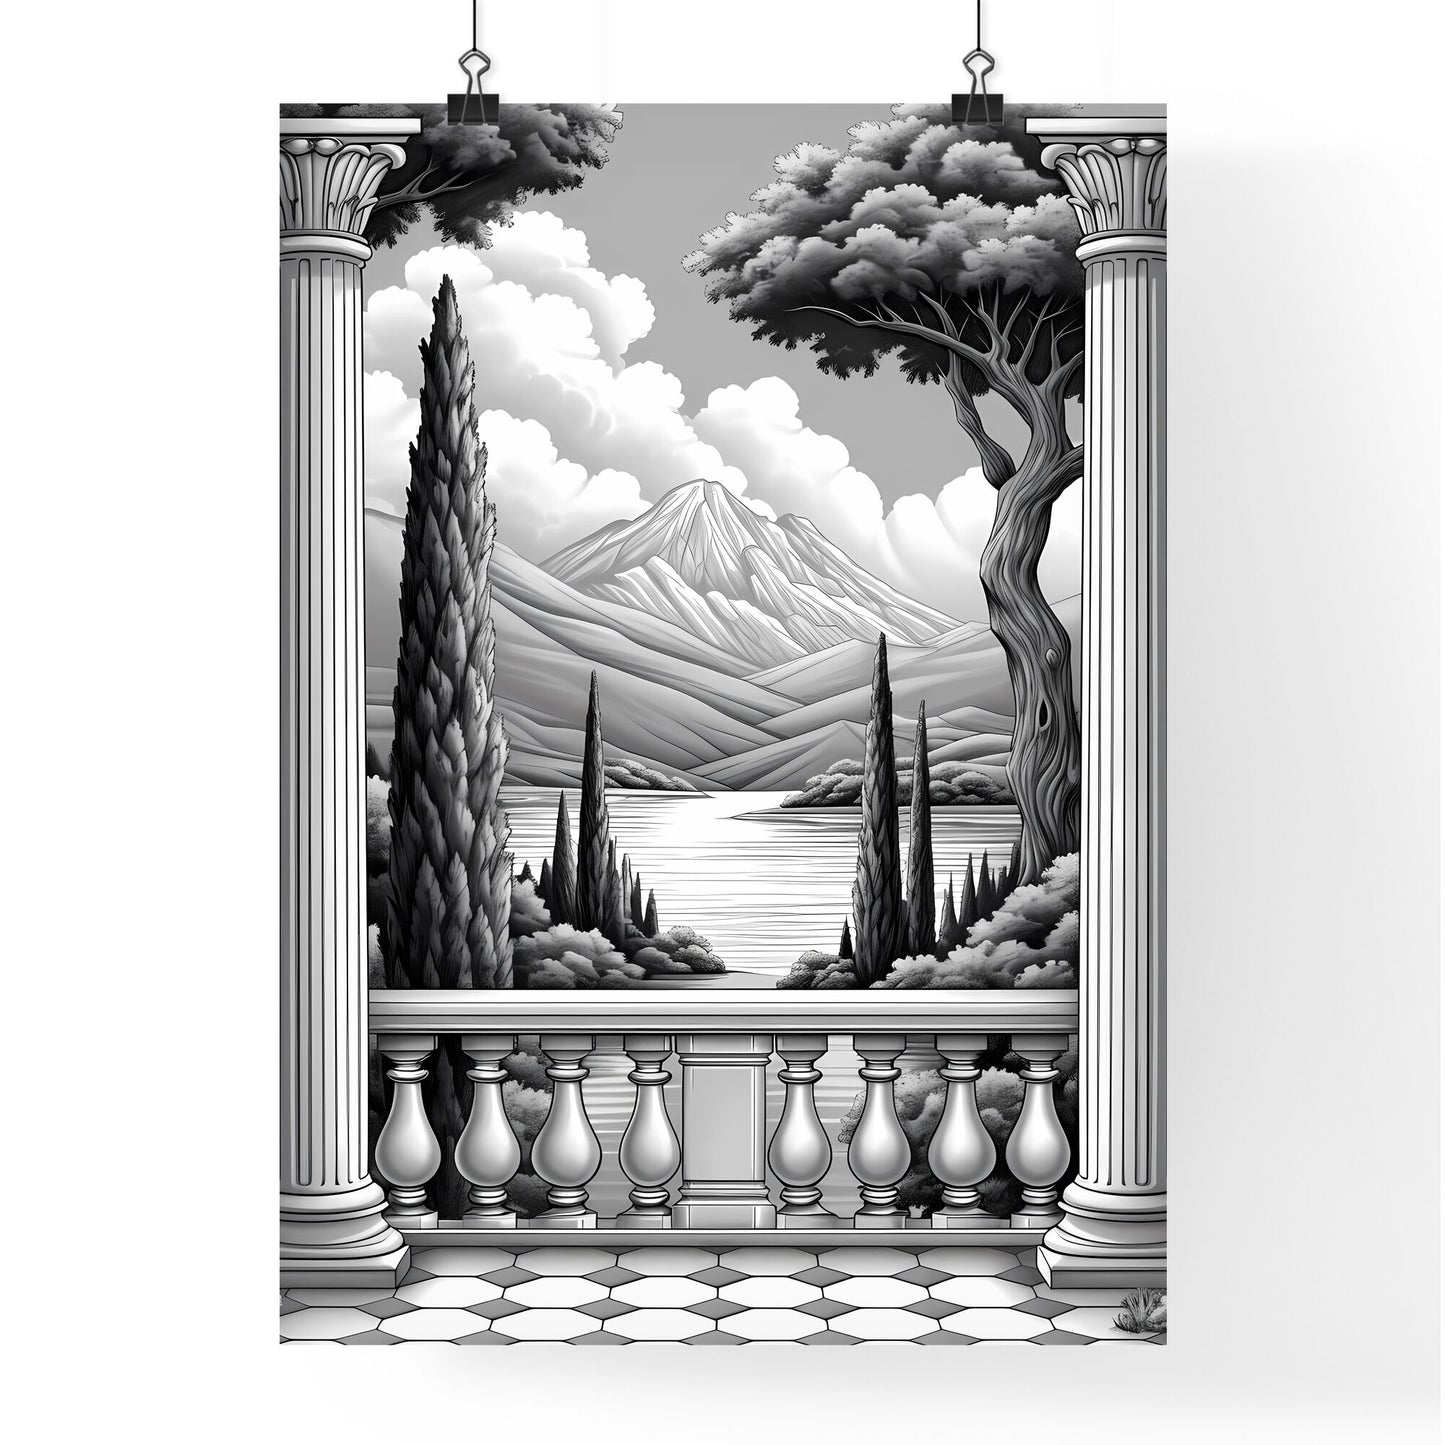 A French Chateau winery - Art print of a black and white drawing of a balcony with columns and trees and mountains Default Title